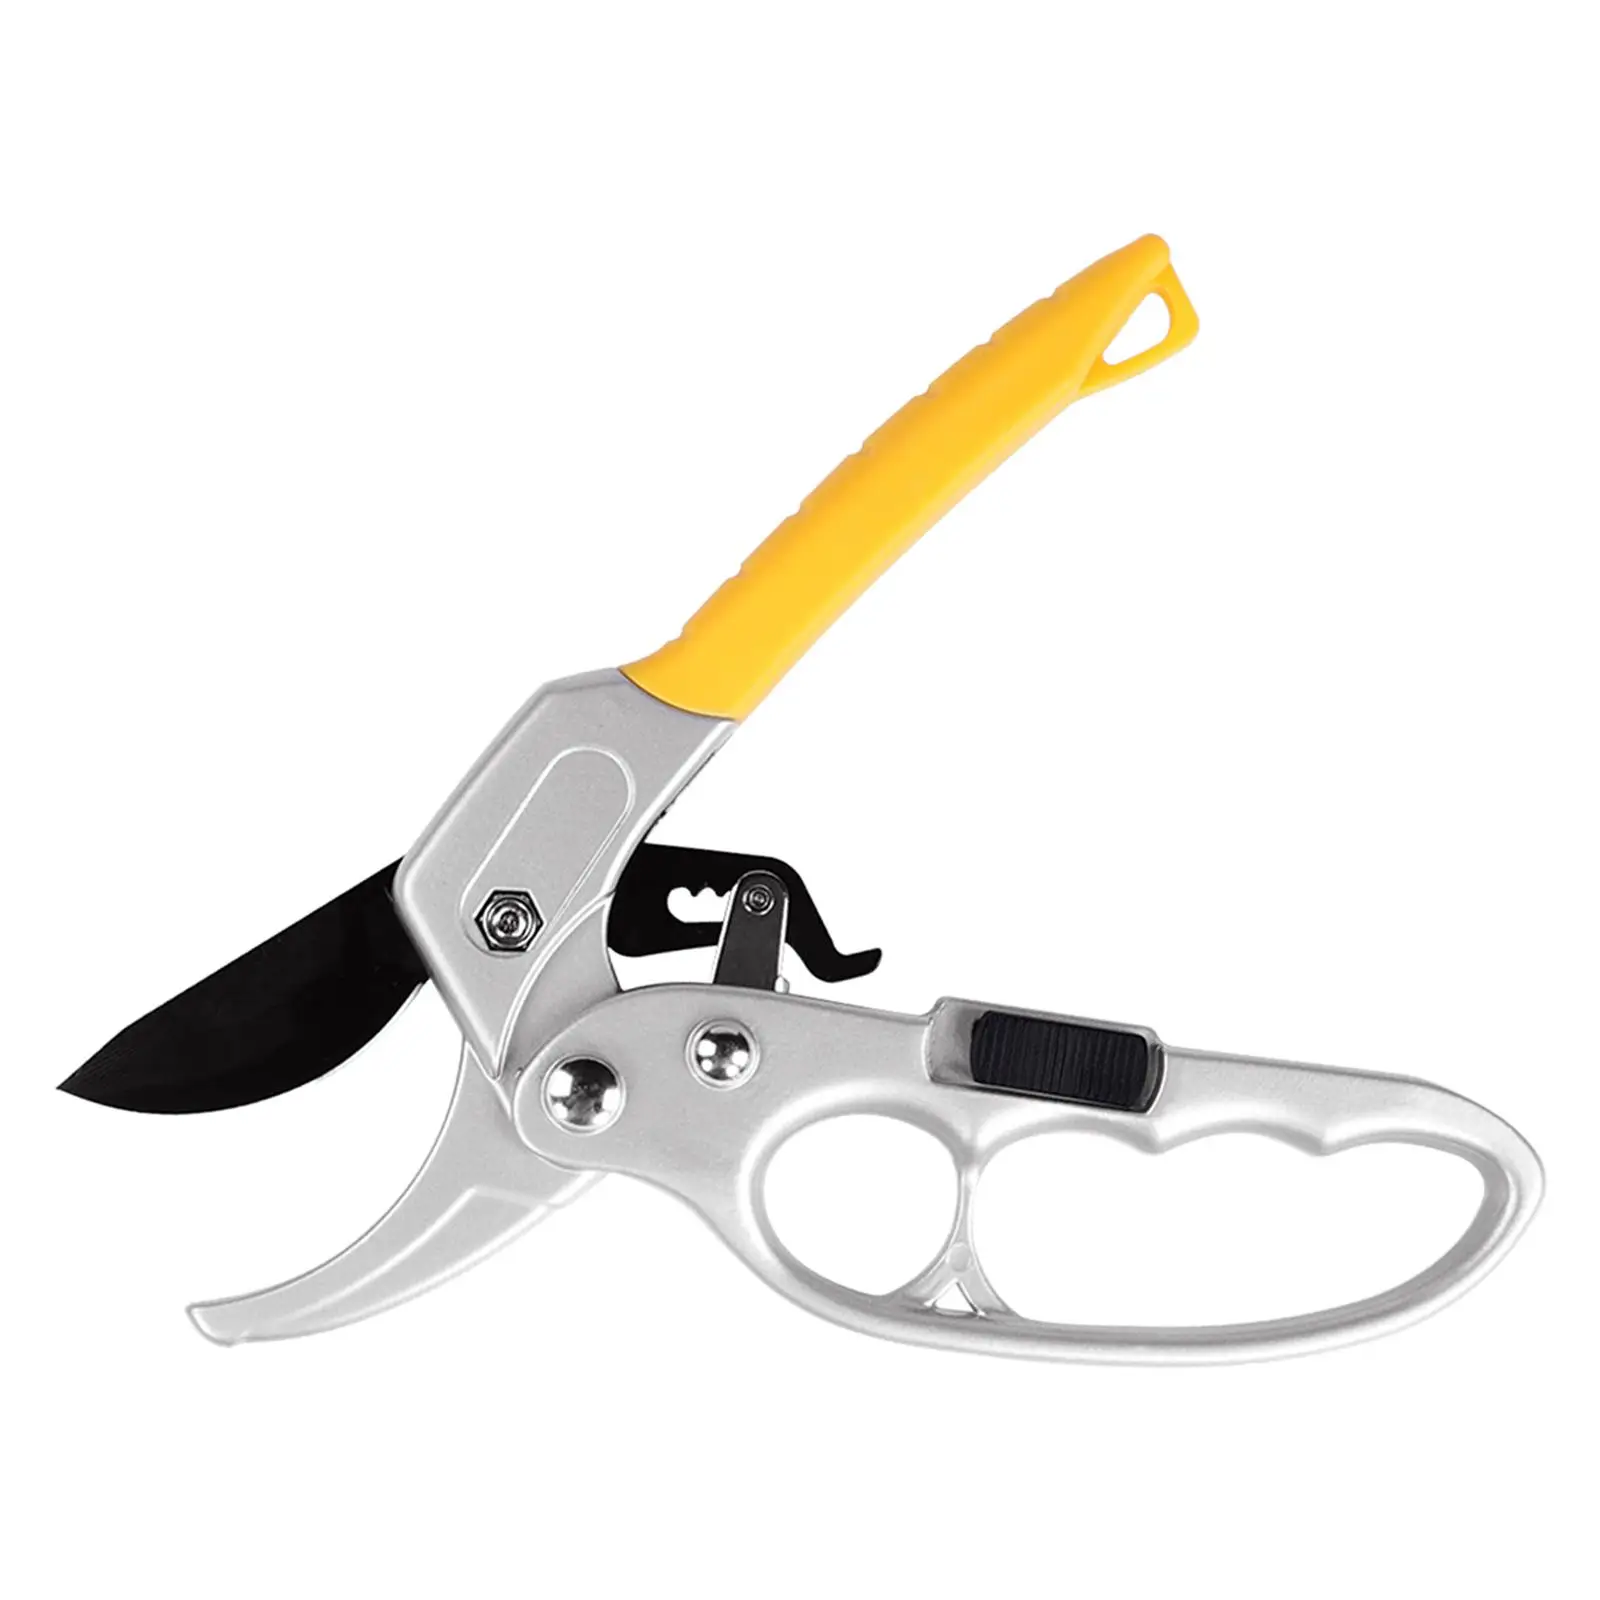 Garden Pruning shear, pruners shear, Angled Hand pruners Trimmer Scissors for Orchard